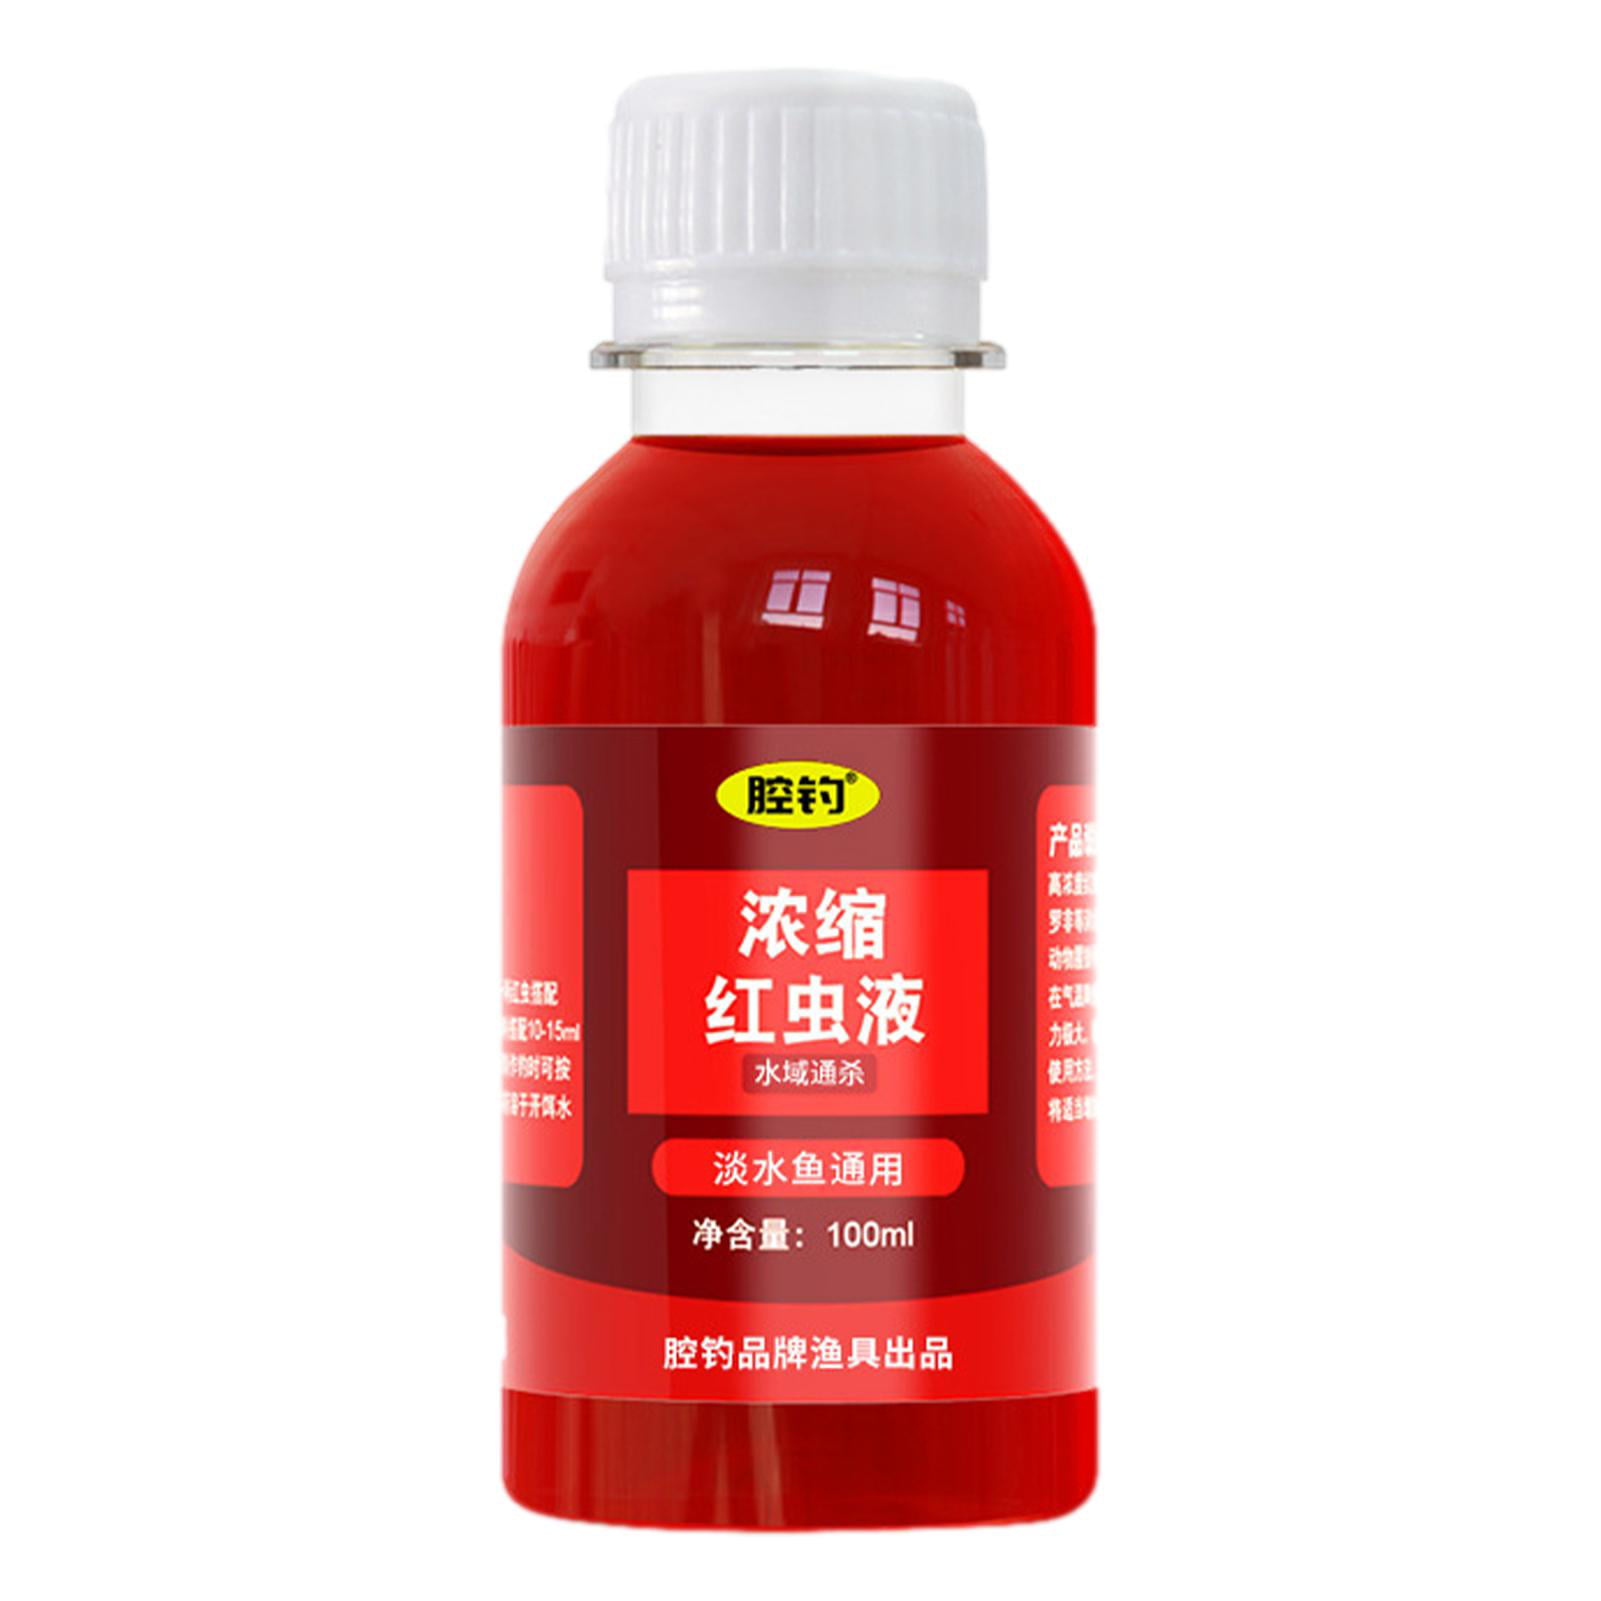 High Concentration Fish Bait, 100ml Concentrated Red Worm Liquid